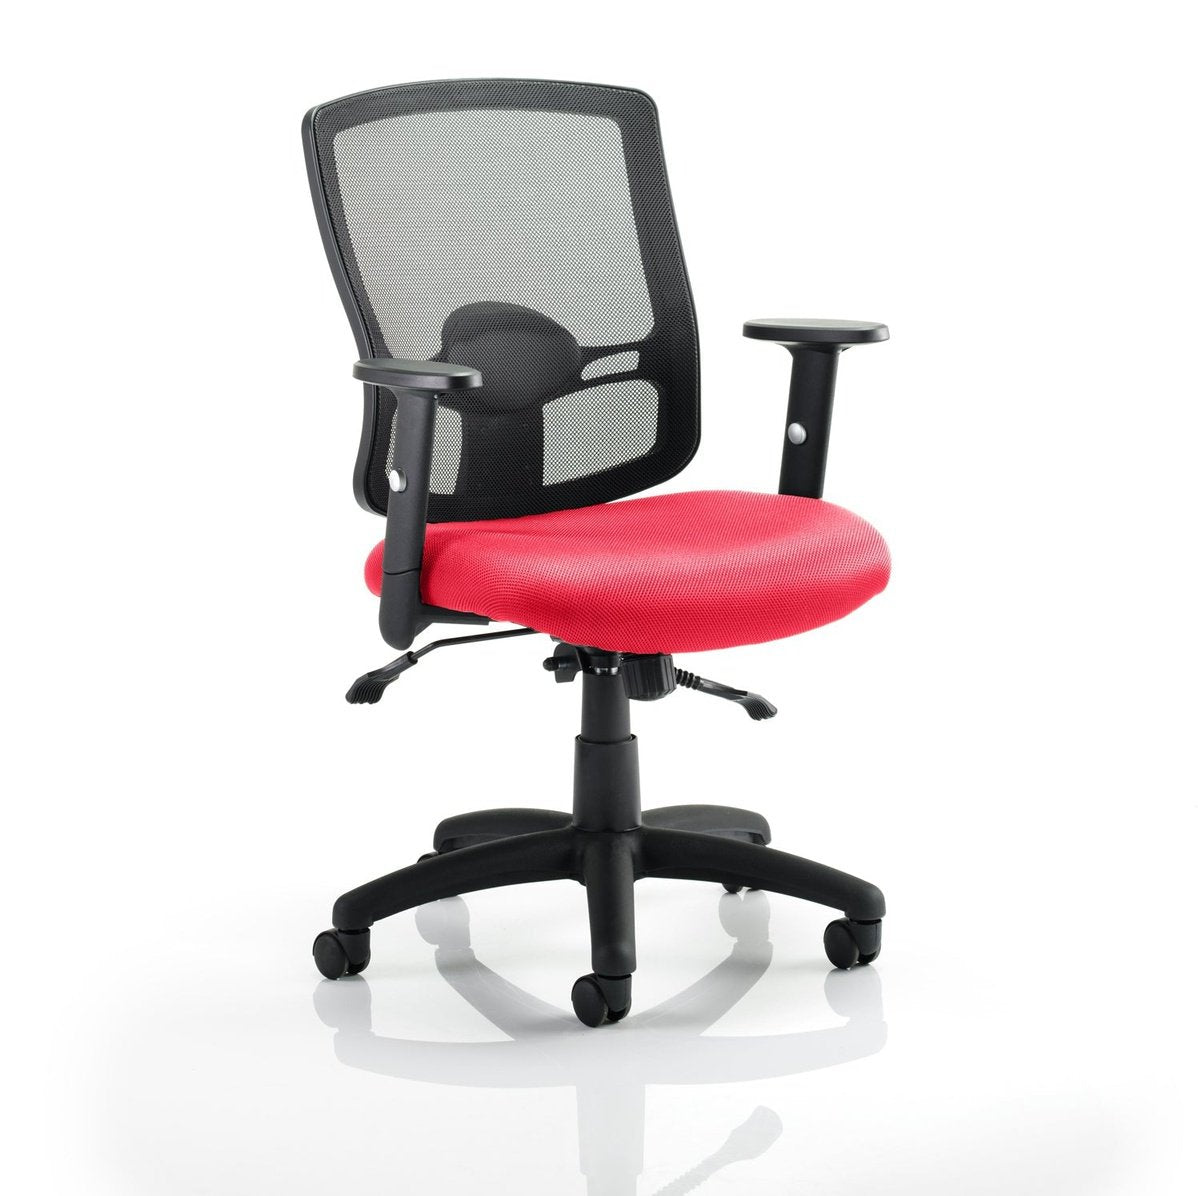 Portland II Medium Mesh Back Task Office Chair - Adjustable Arms, Lumbar Support, 125kg Capacity, 8hr Usage, Flat Packed